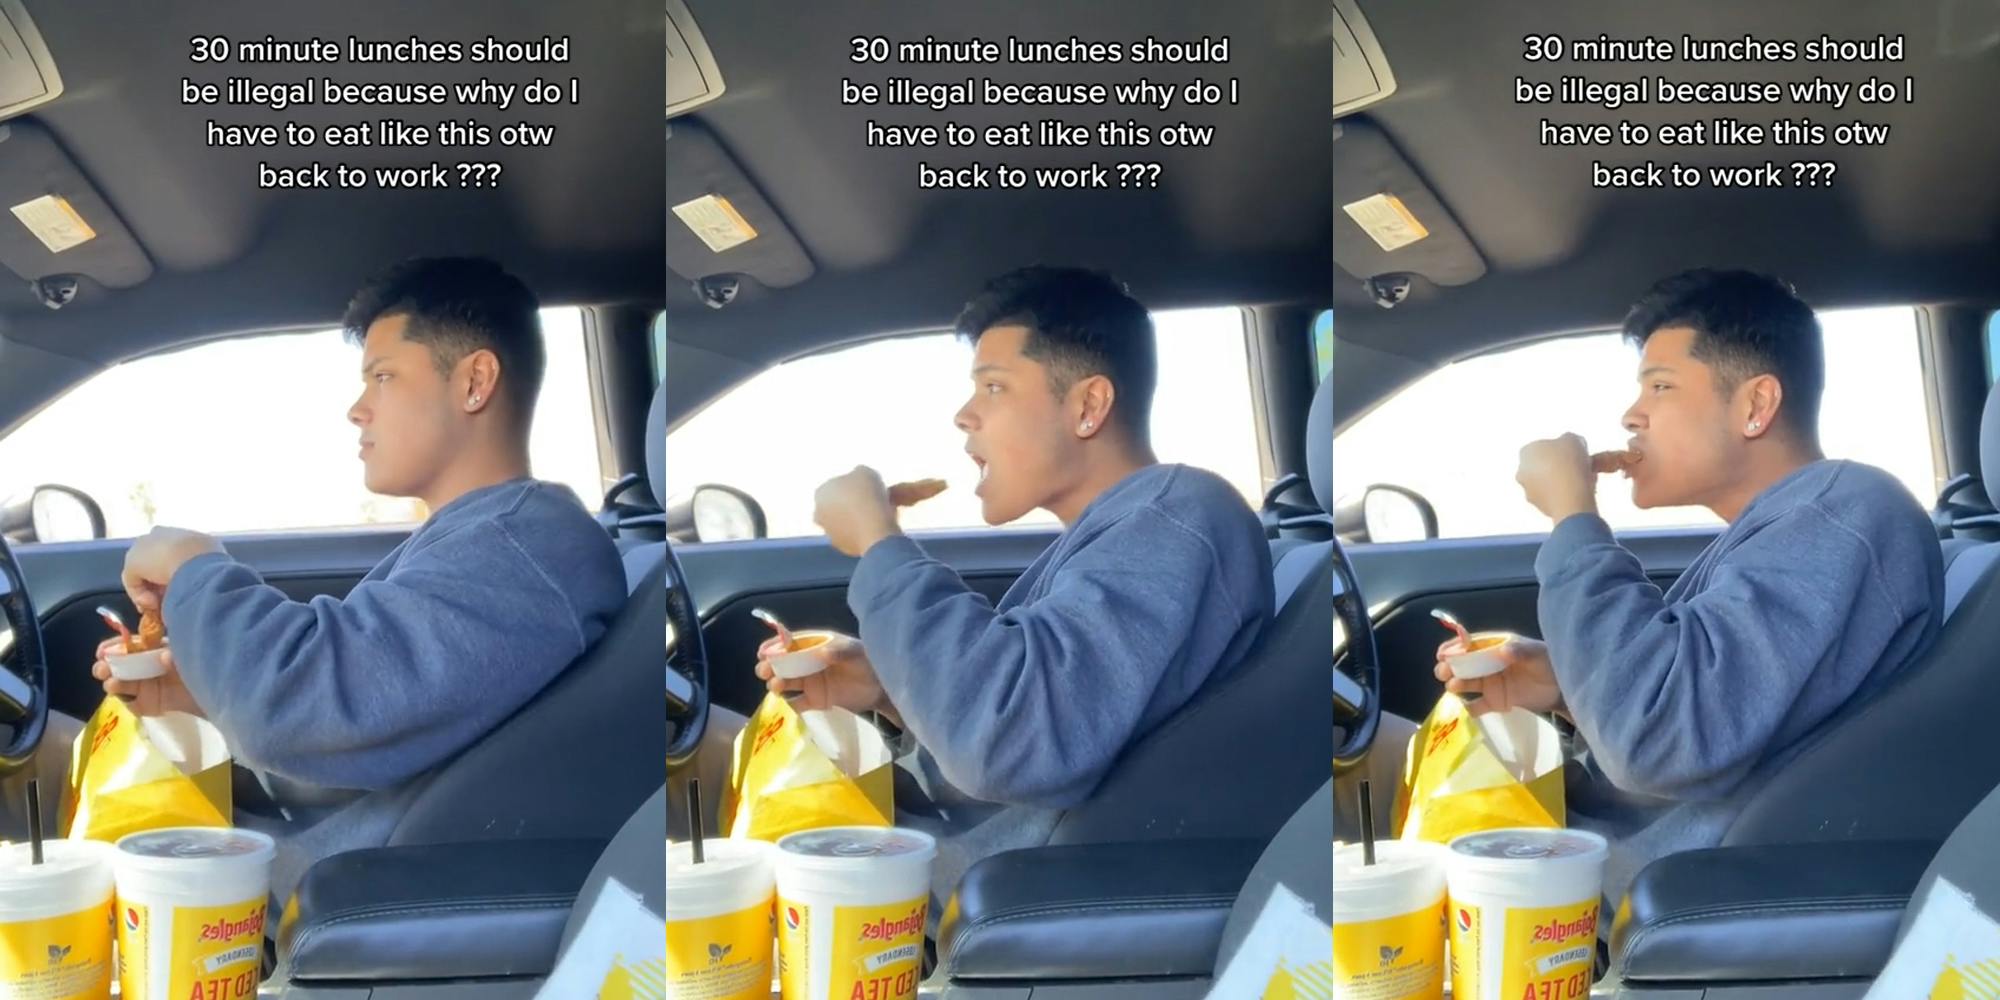 worker dipping chicken into sauce in car with caption "30 minute lunches should be illegal because why do I have to eat like this otw back to work ???" (l) worker holding chicken up to mouth in car with caption "30 minute lunches should be illegal because why do I have to eat like this otw back to work ???" (c) worker biting chicken in car with caption "30 minute lunches should be illegal because why do I have to eat like this otw back to work ???" (r)